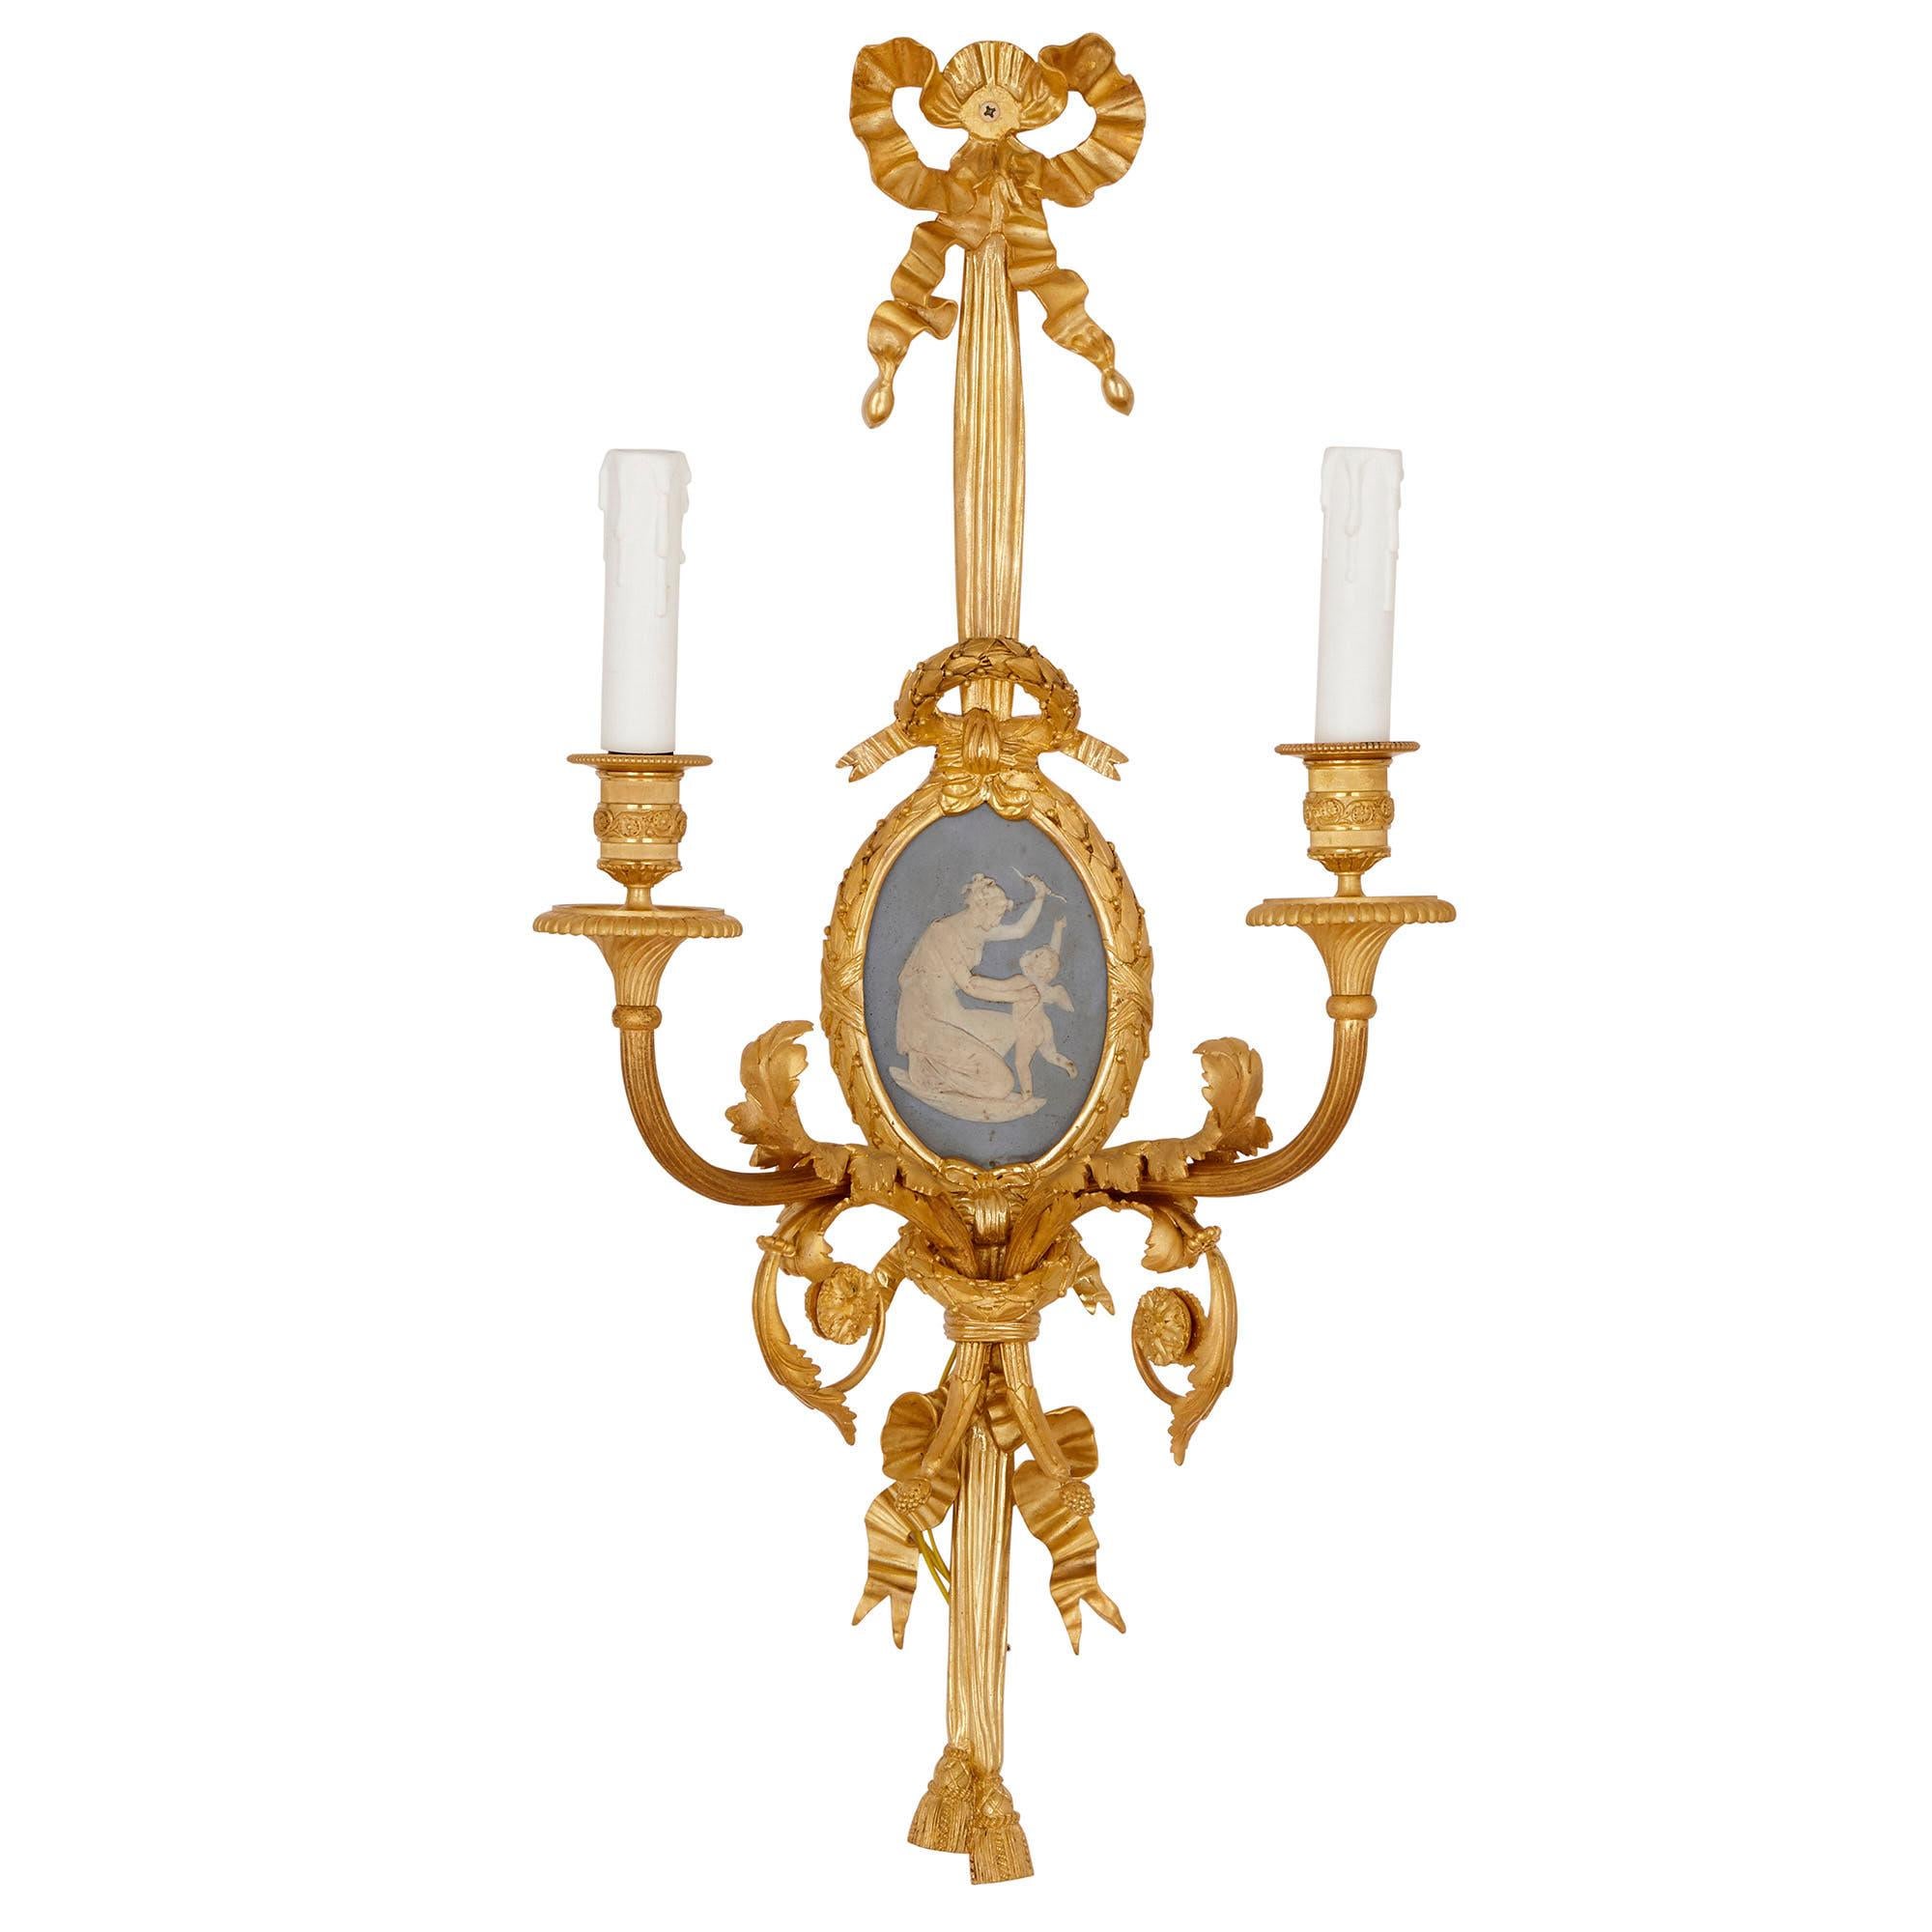 These exquisite wall lights were created in the late 19th century by the famous bronzier, Henri Vian (French, 1860-1905). These wall lights are stamped ‘HV 955’ for Henri Vian, along with ‘BY’ for the prestigious Beurdeley furniture-making workshop